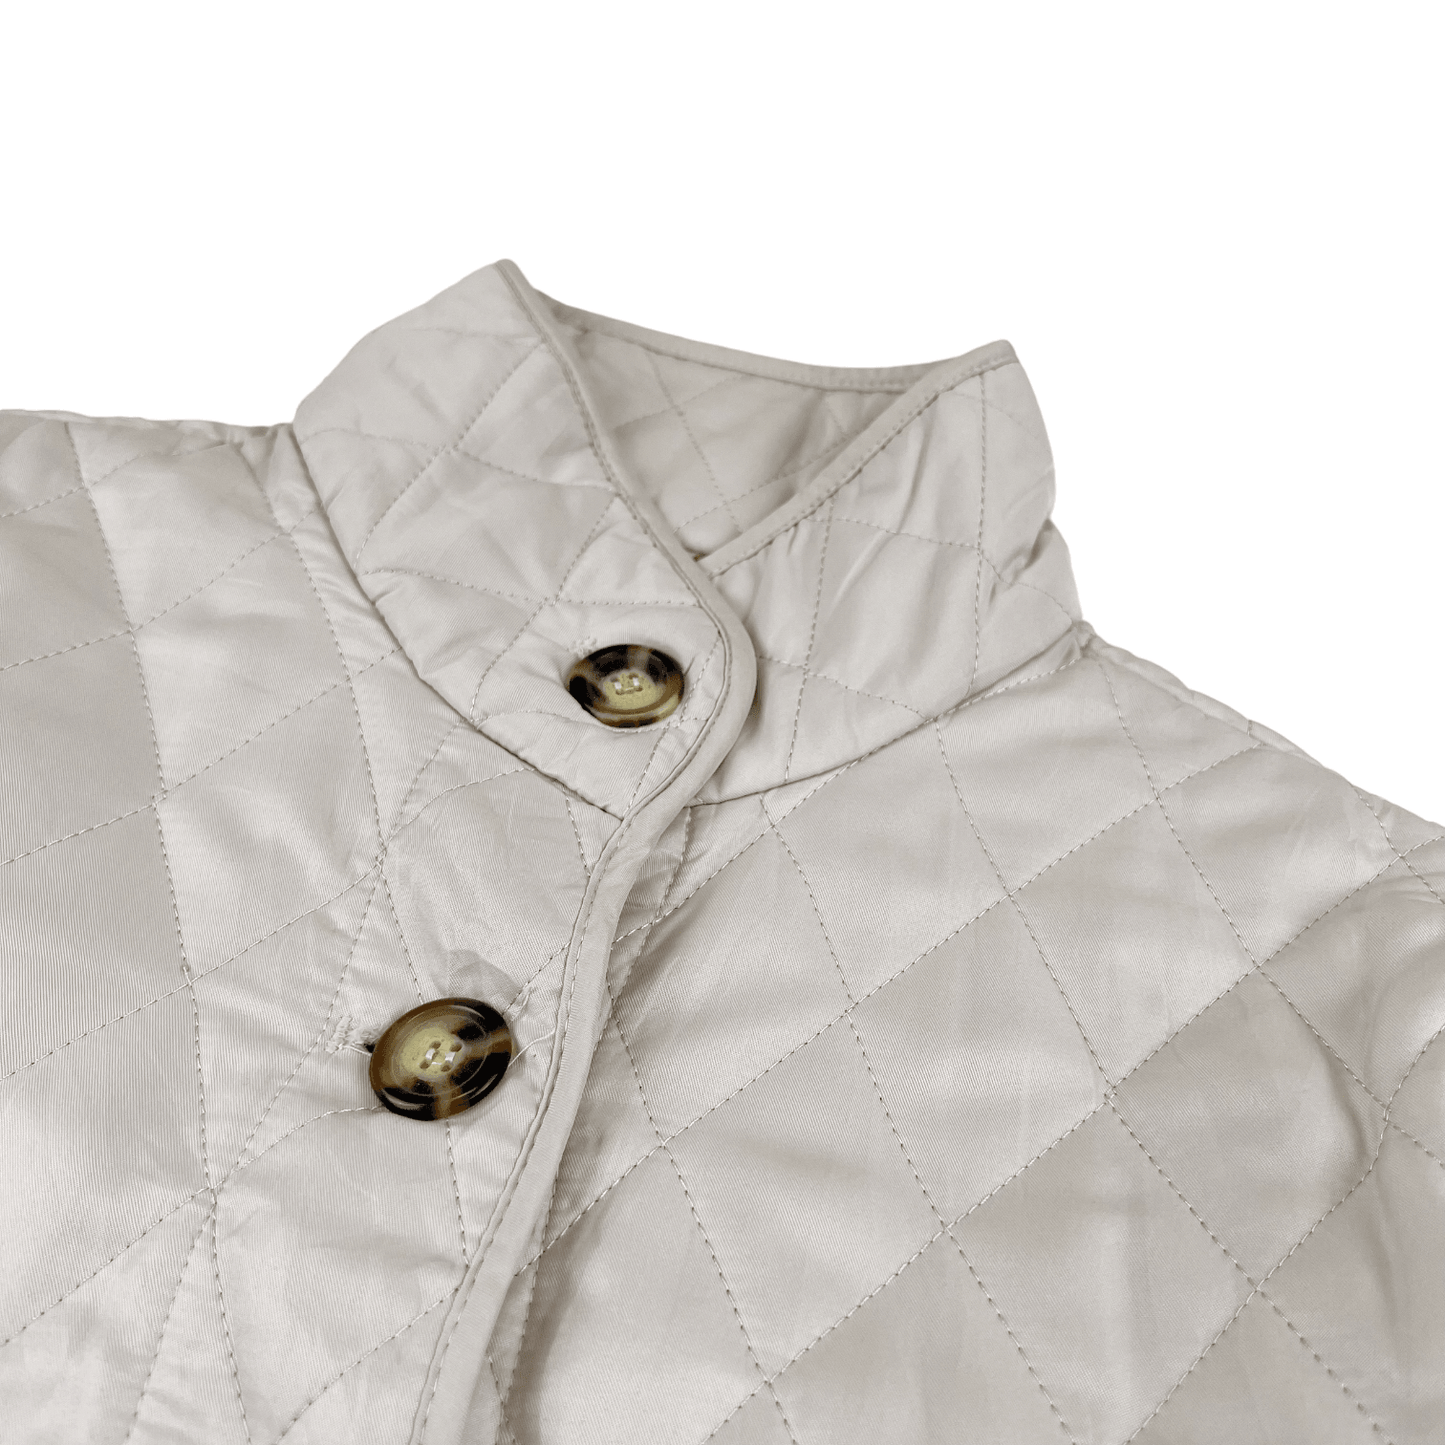 Burberry Quilted Jacket (L) - Known Source